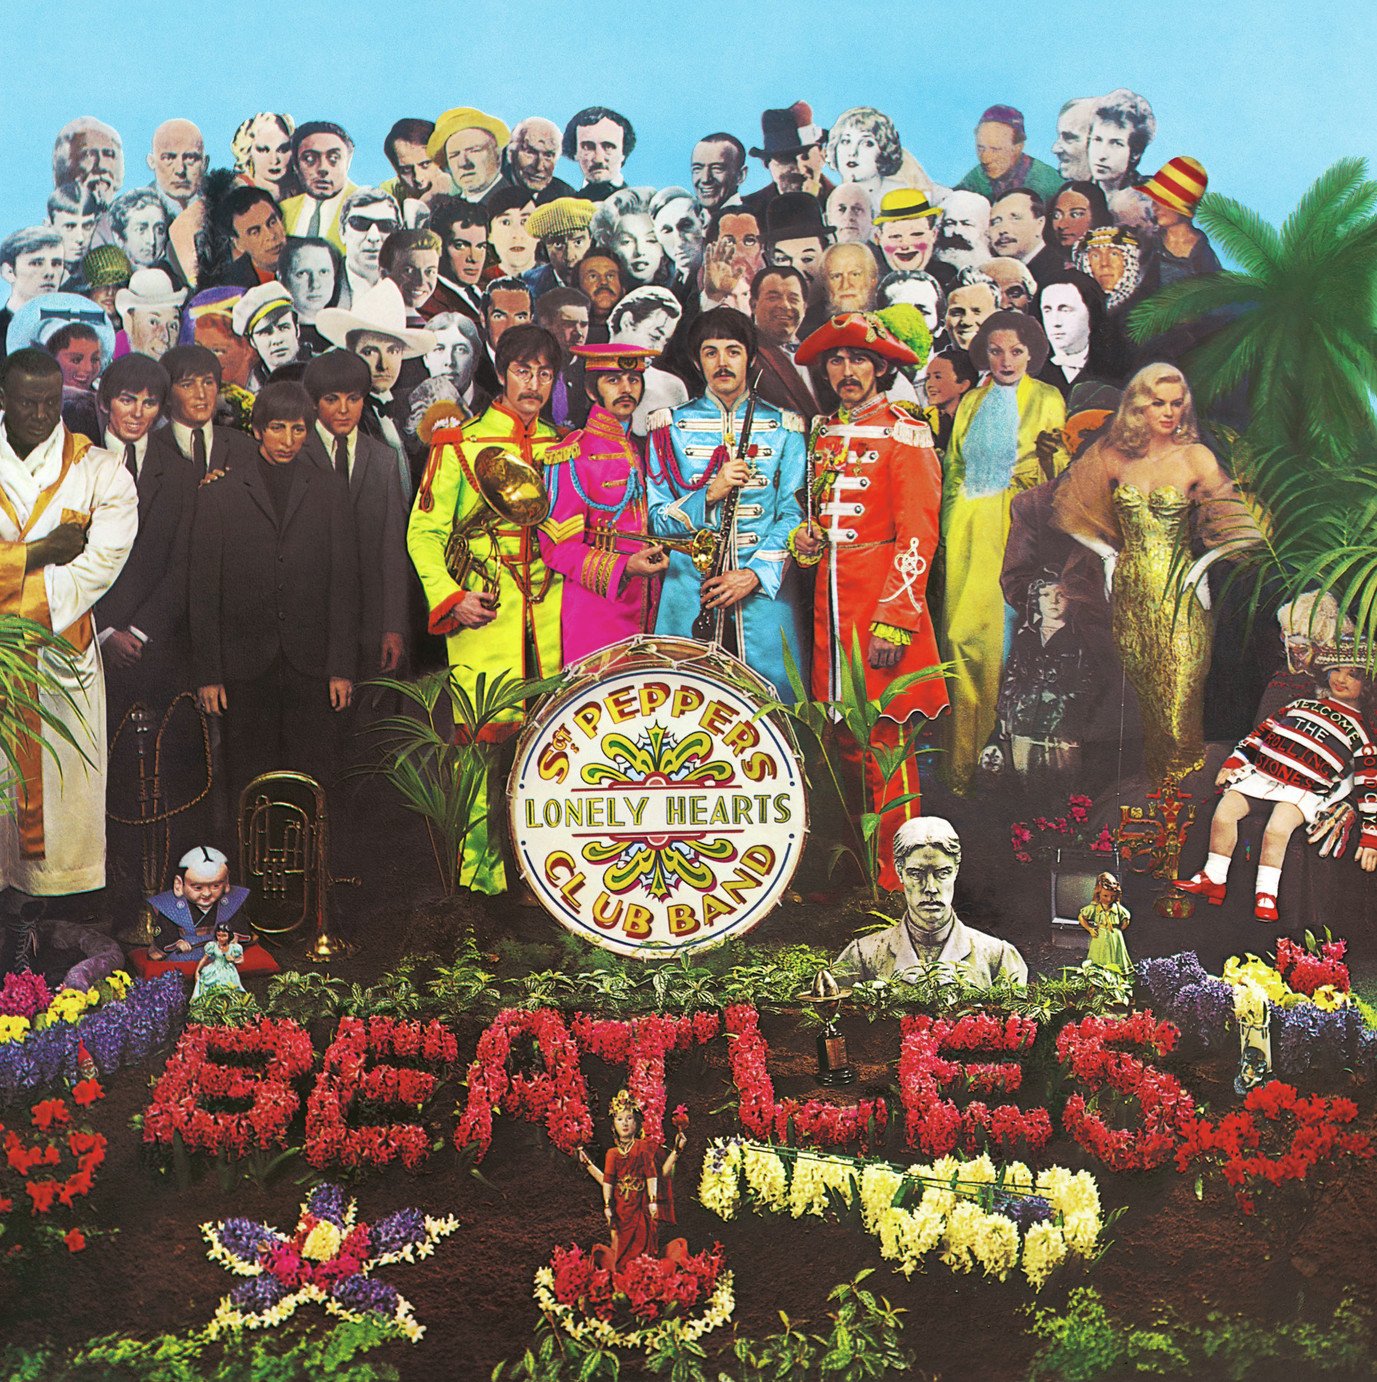 The Beatles Sgt Pepper's Lonely Hearts Club Band Vinyl